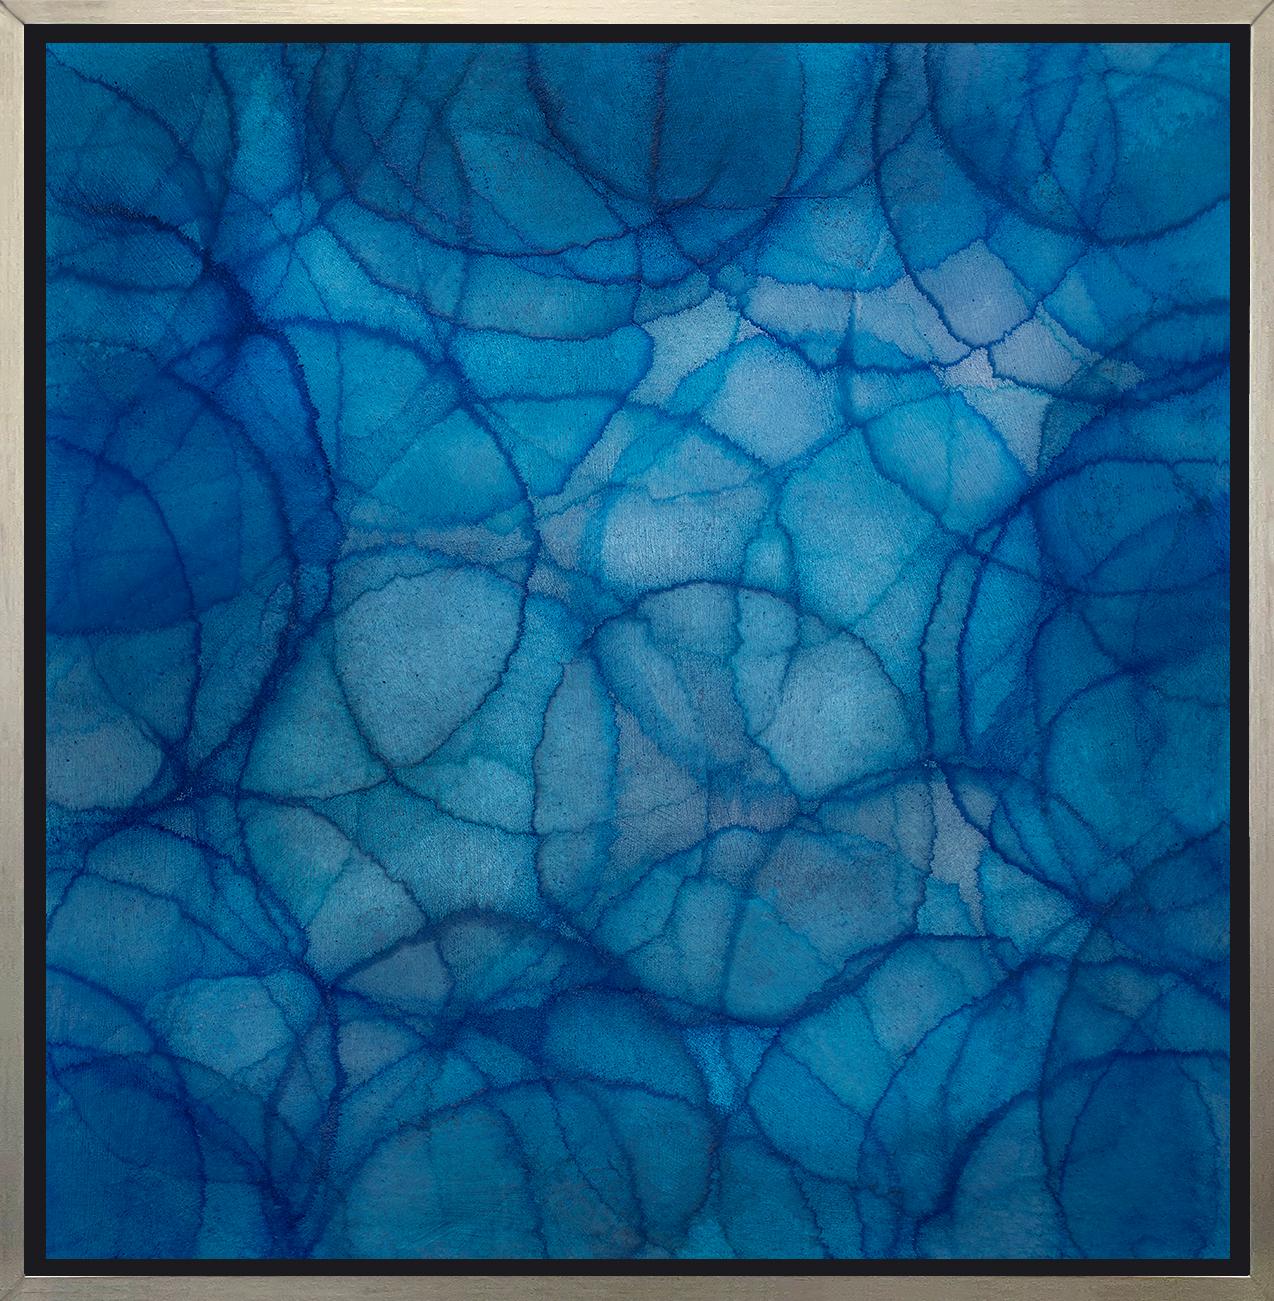 Roger Mudre Abstract Print - "Cineraria, " Framed Limited Edition Giclee Print, 48" x 48"